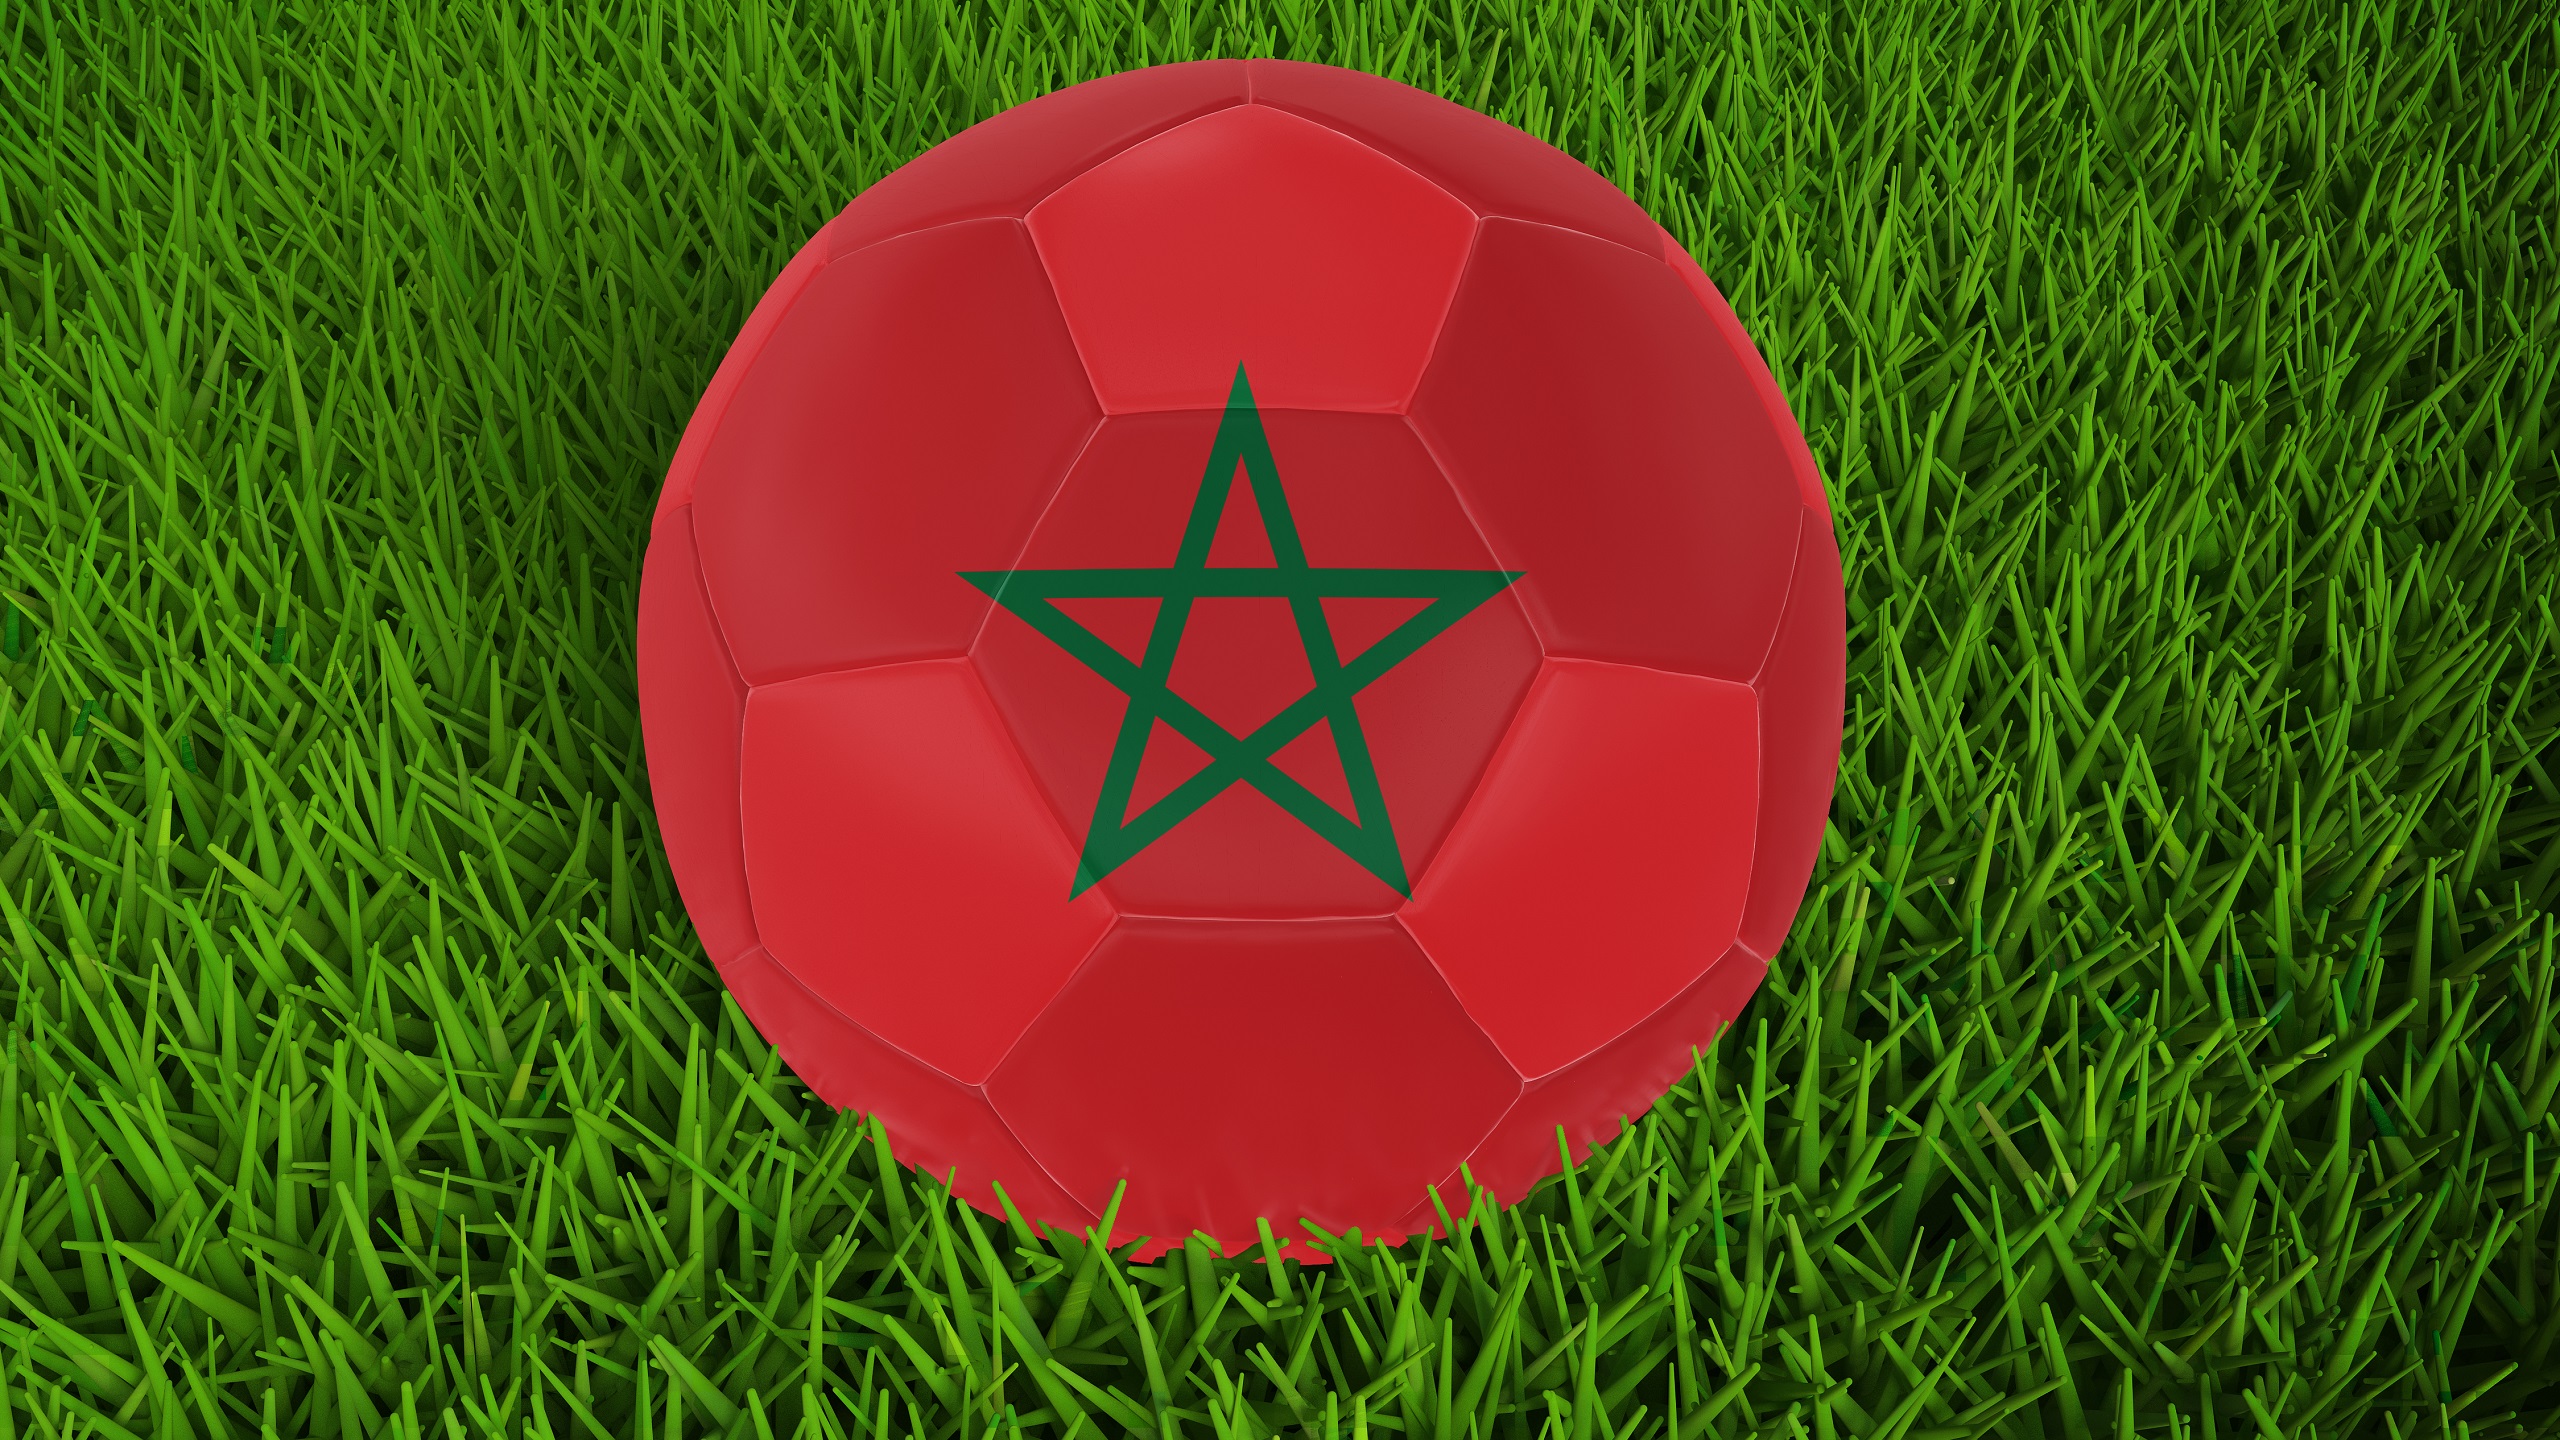 Morocco Joins Spain, Portugal in Joint Bid To Host 2030 World Cup